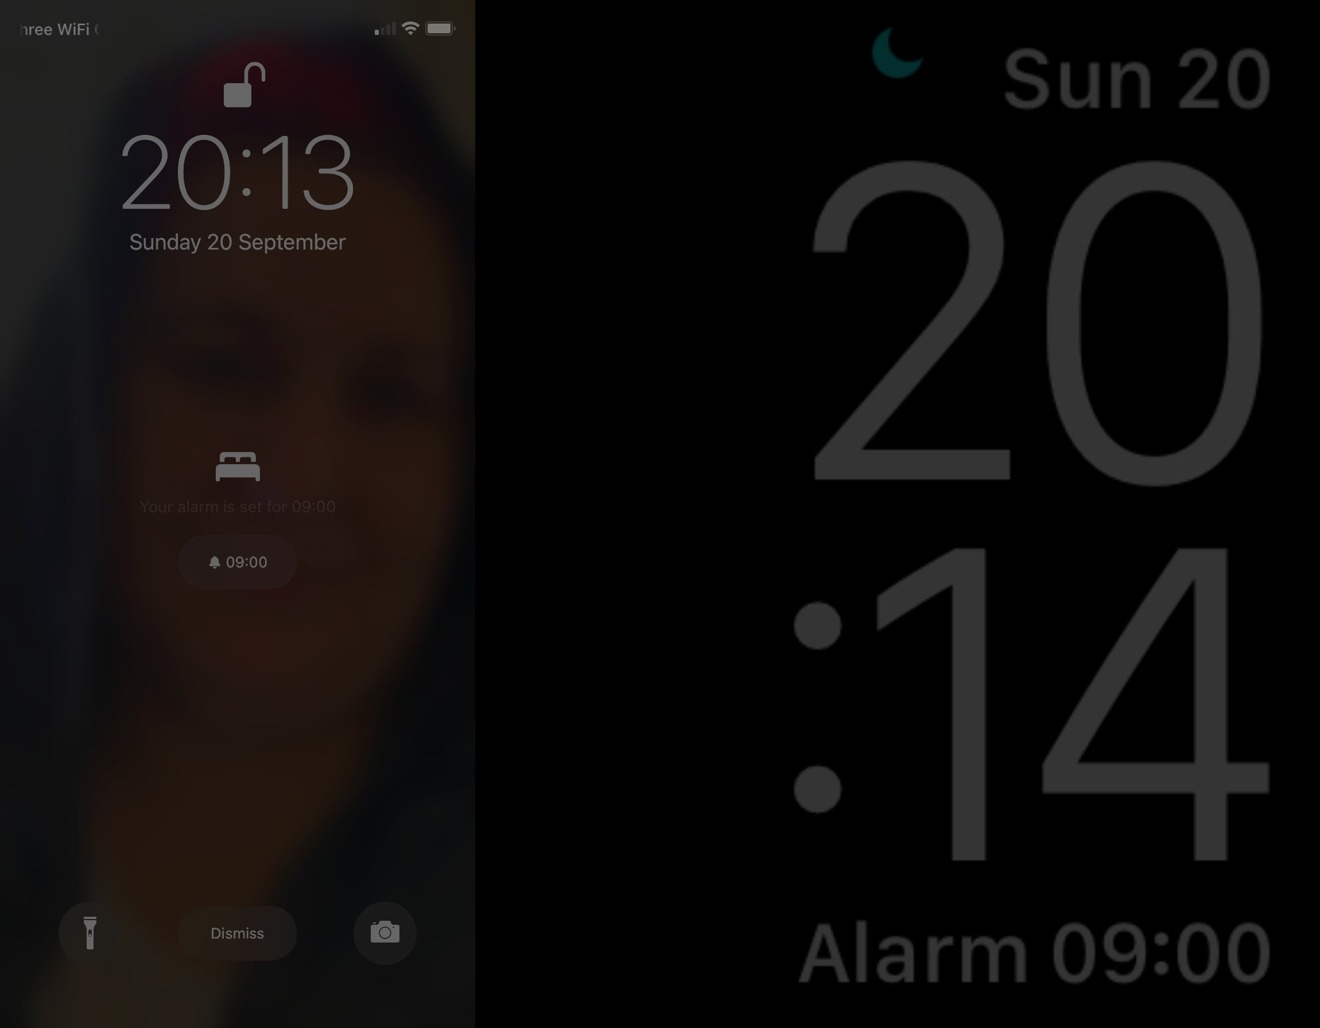 The Lock Screens of iOS 14 and watchOS 7 during Sleep Mode. 